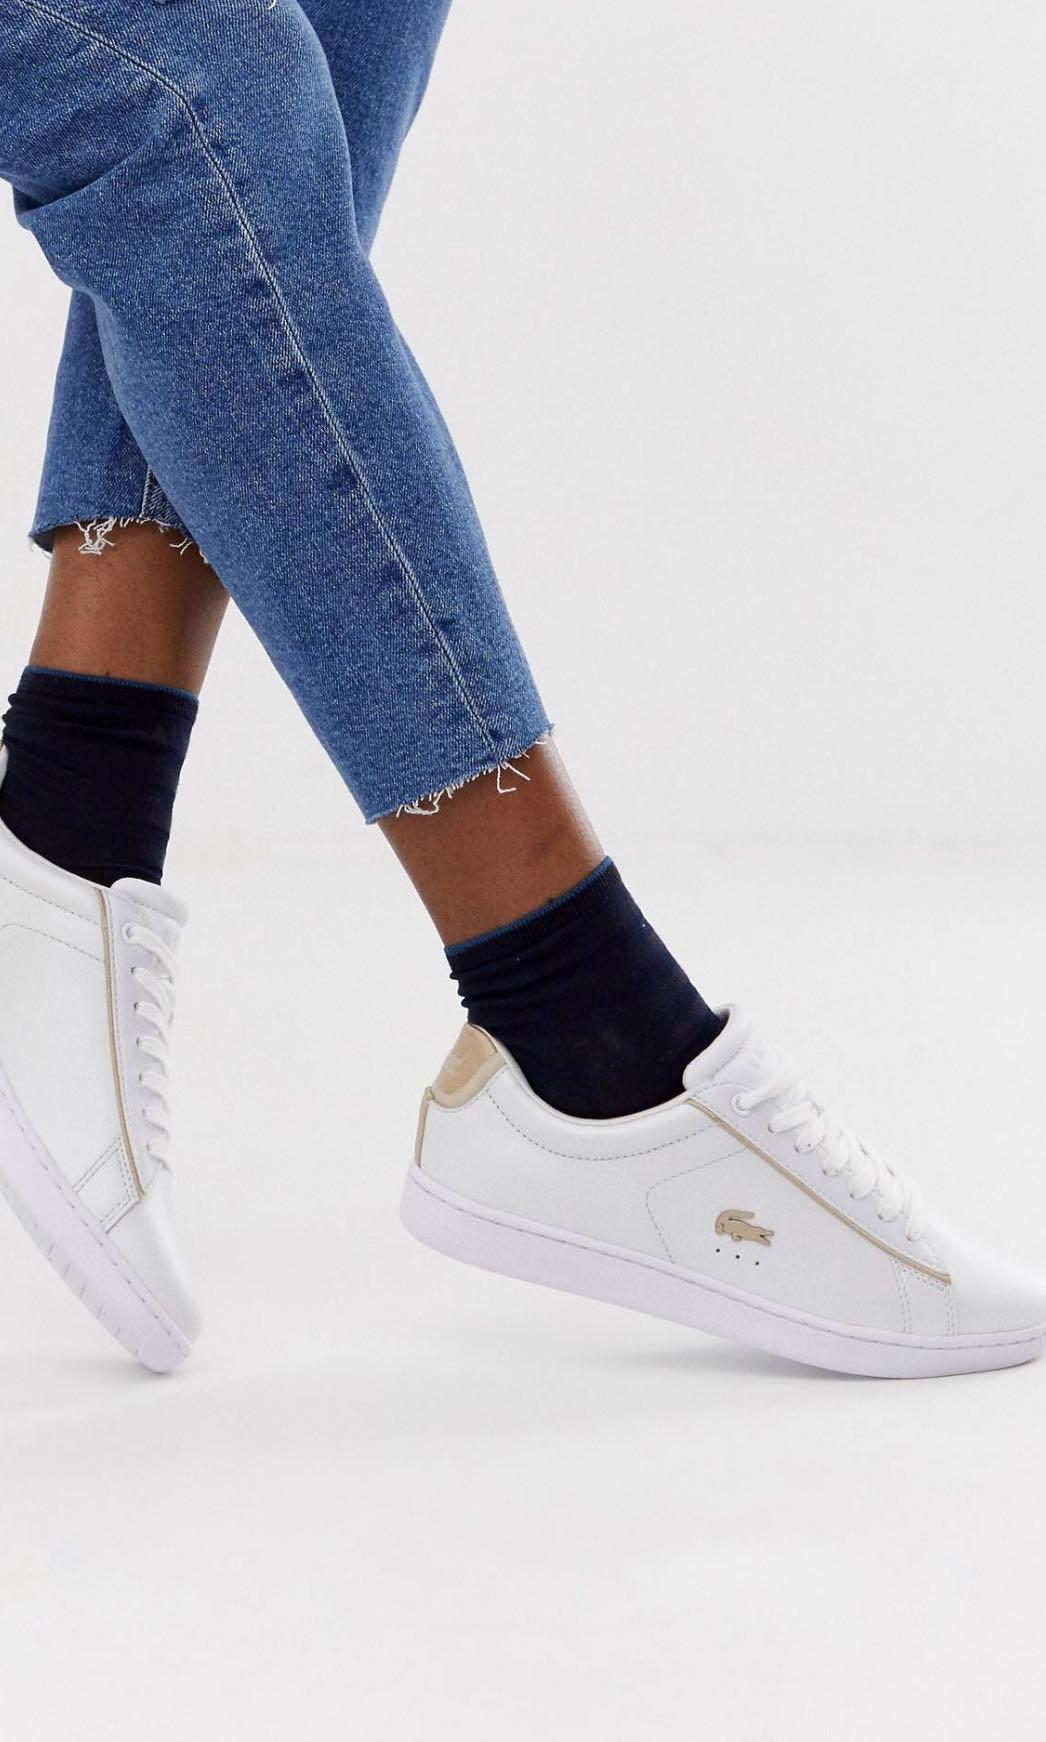 lacoste white and gold trainers